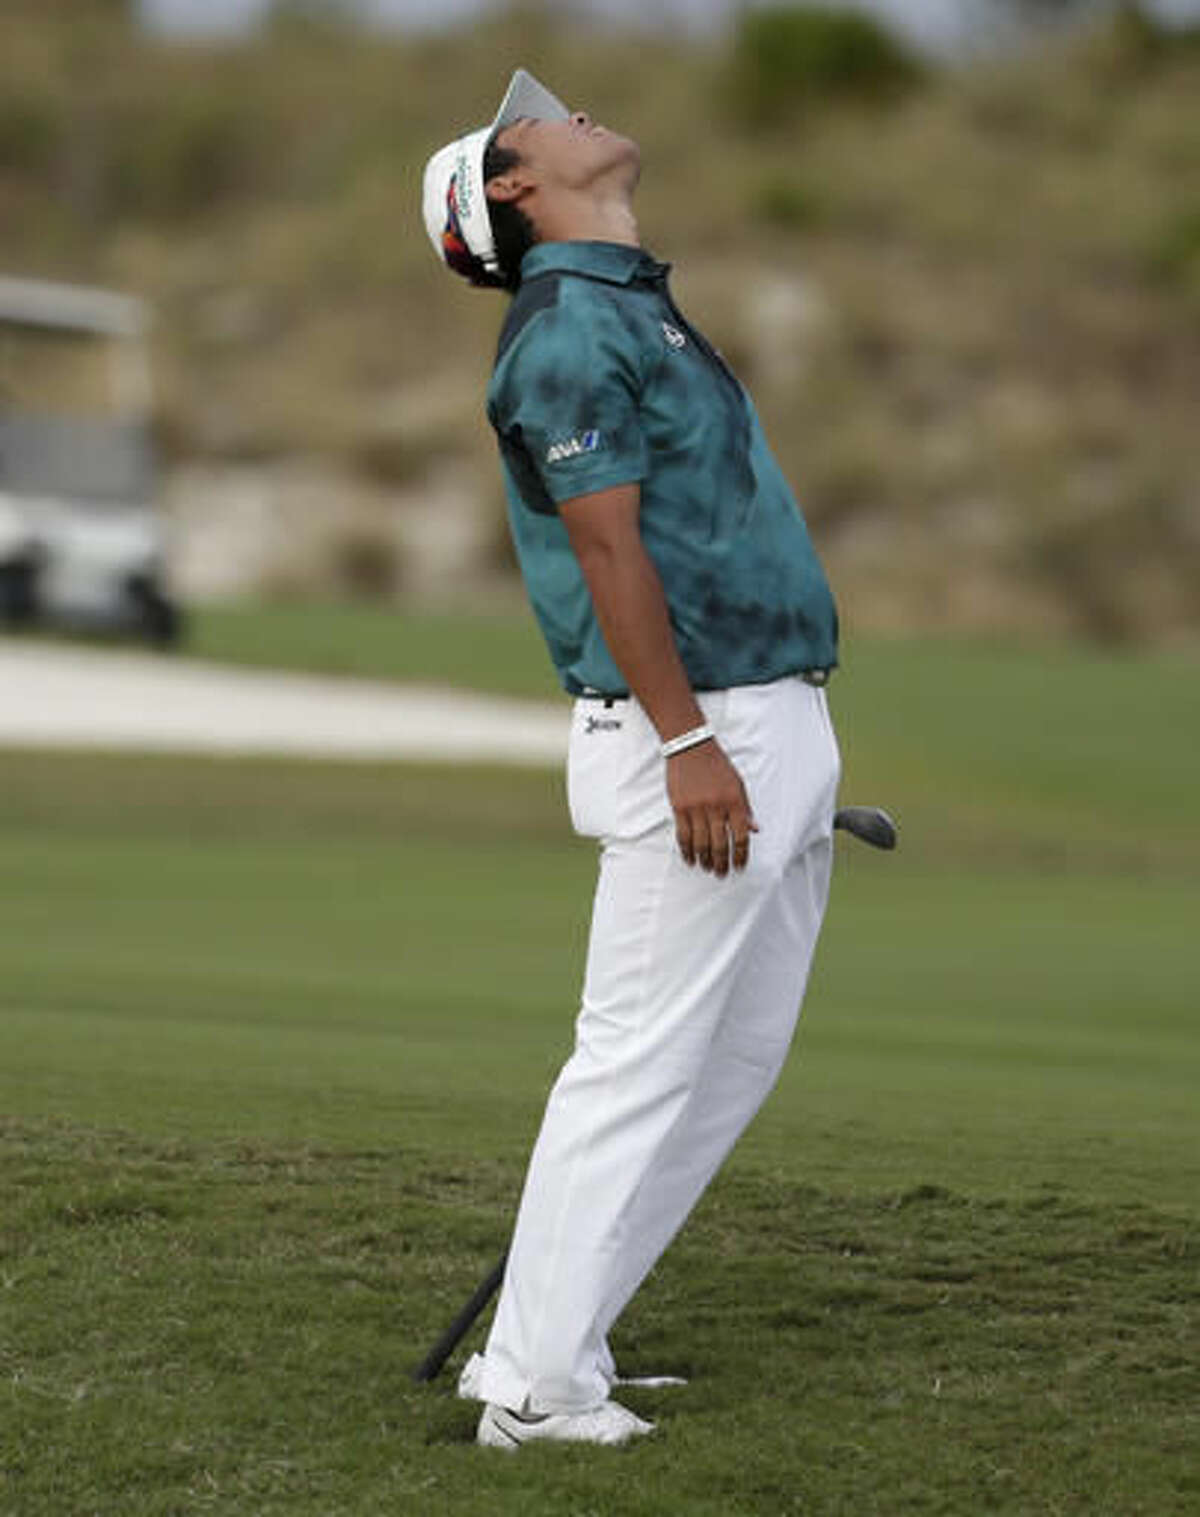 Hideki Matsuyama, of Japan, reacts after hitting from a bunker on the 16th fairway during the third round at the Hero World Challenge golf tournament, Saturday, Dec. 3, 2016, in Nassau, Bahamas. (AP Photo/Lynne Sladky)